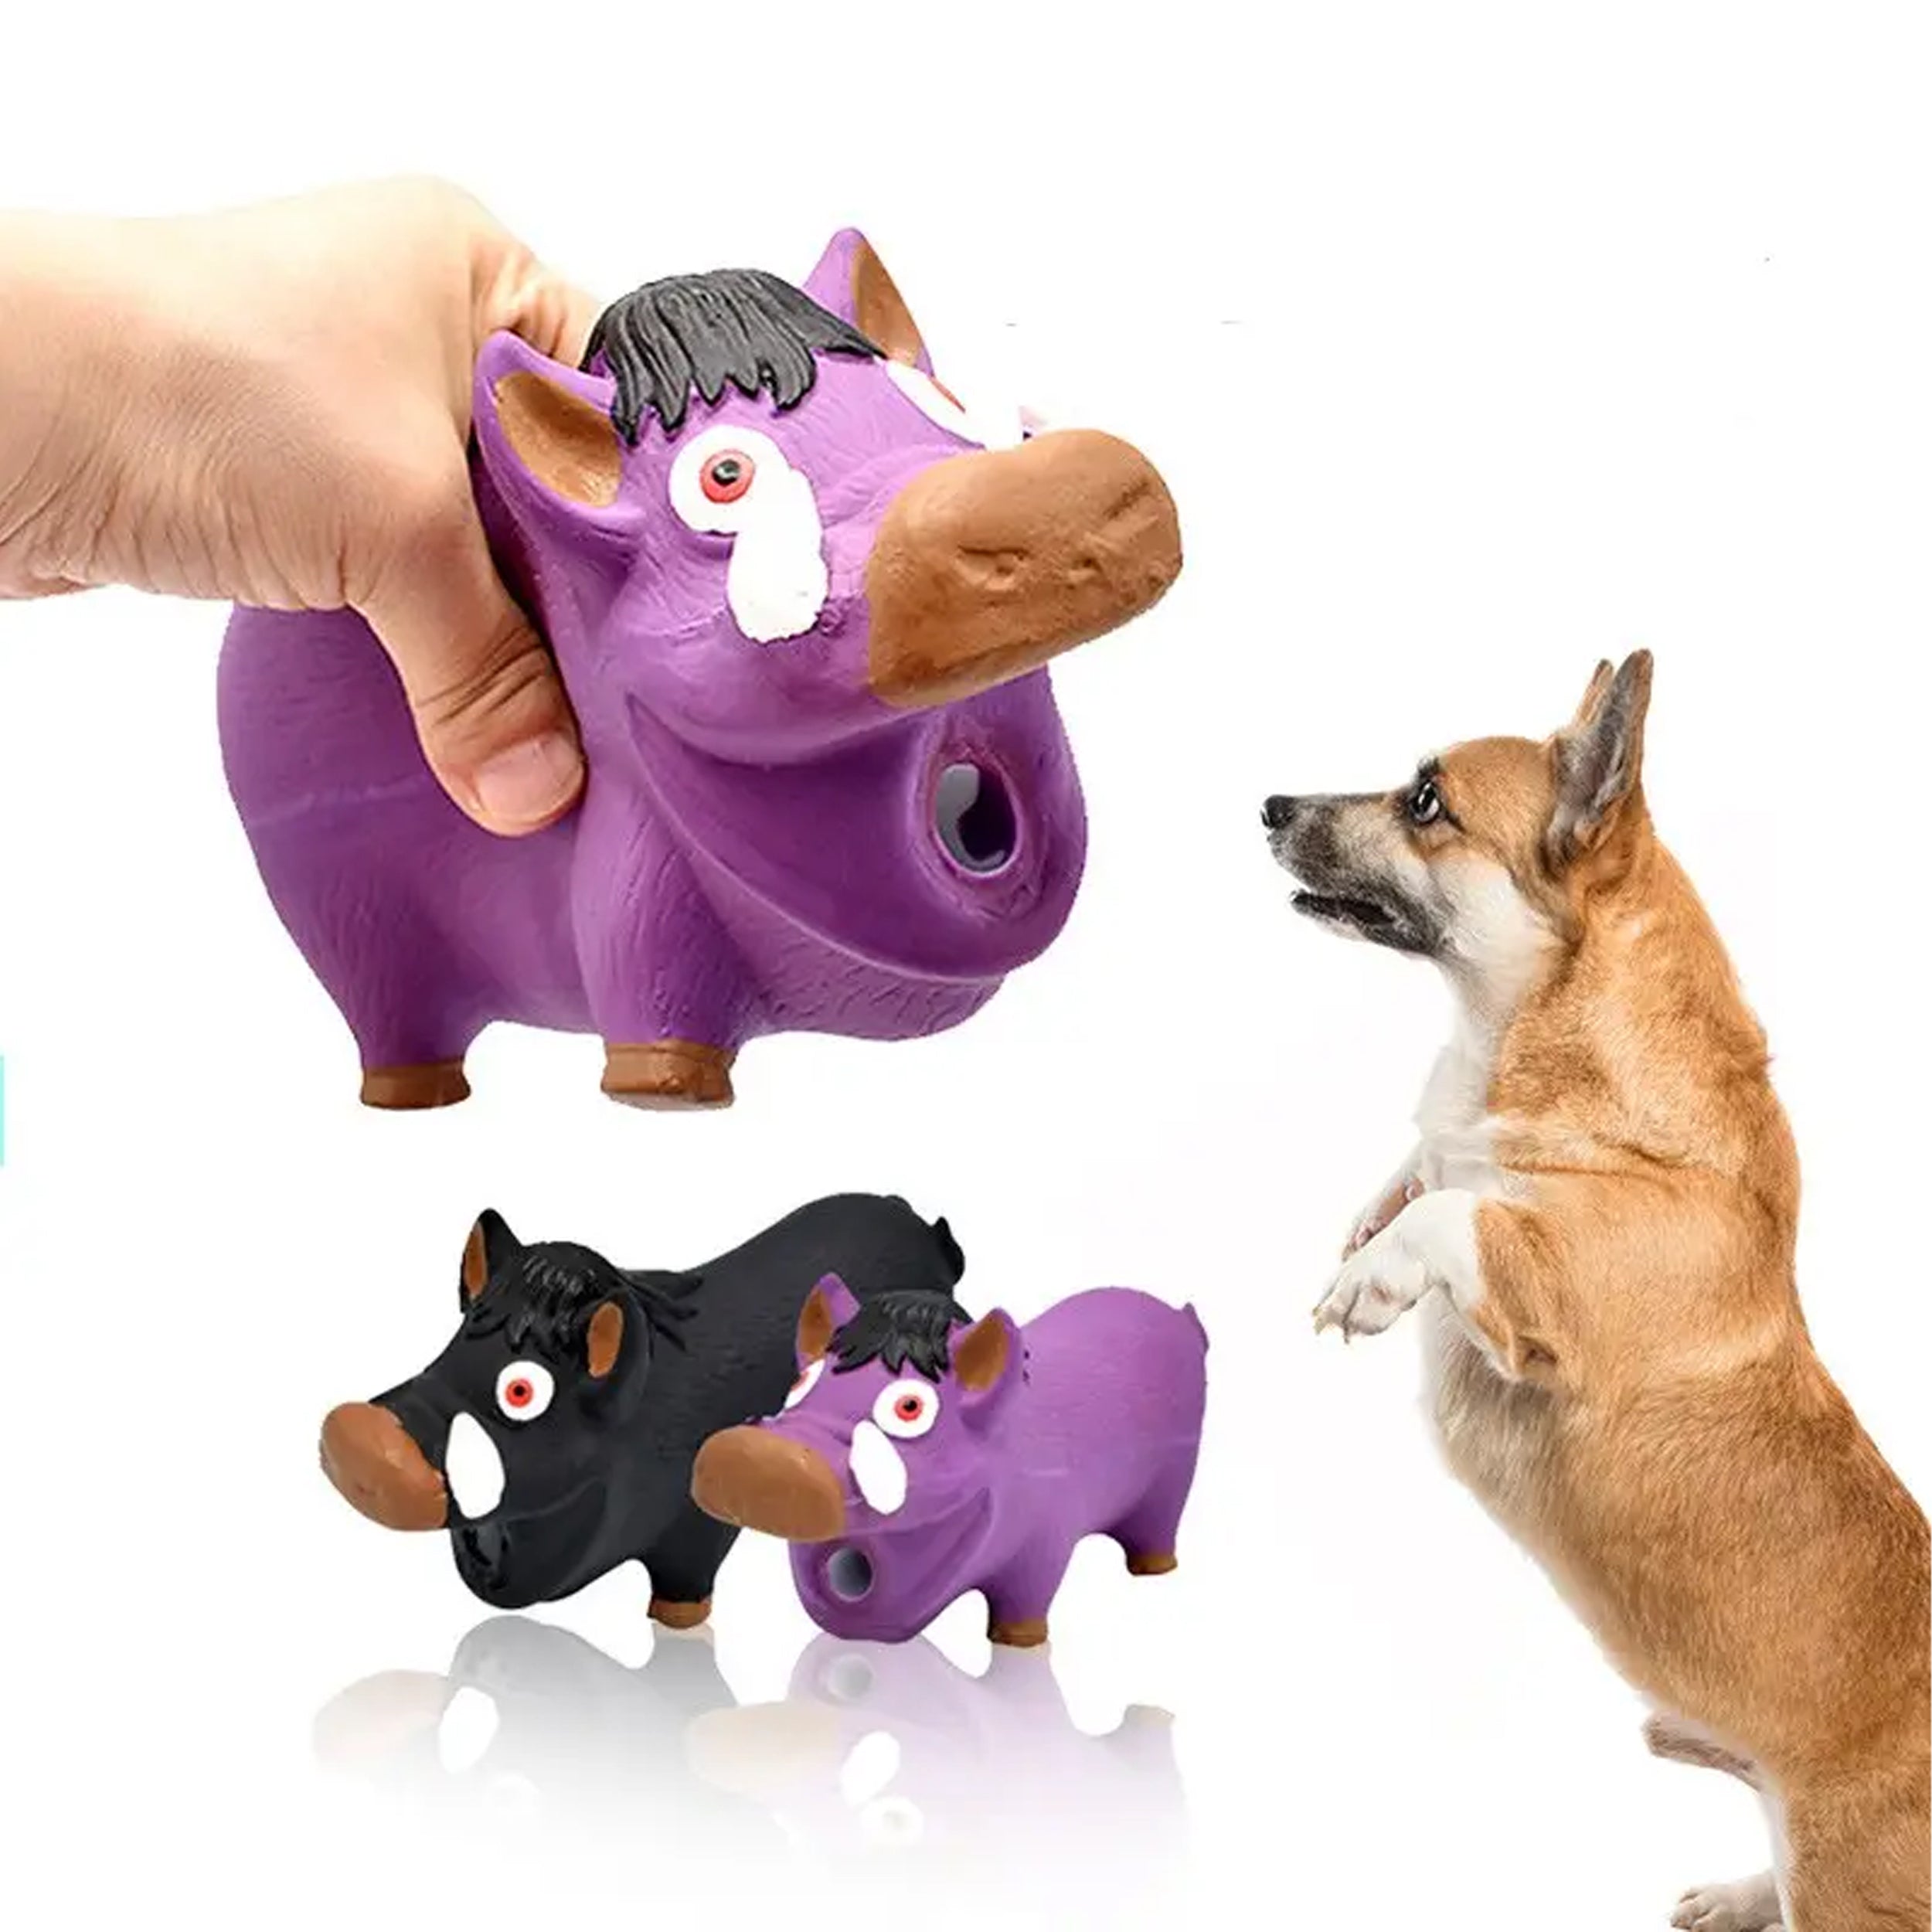 Keep Your Dog Safe & Entertained with Safe Material Wild Boar Shape Funny Dog Toy